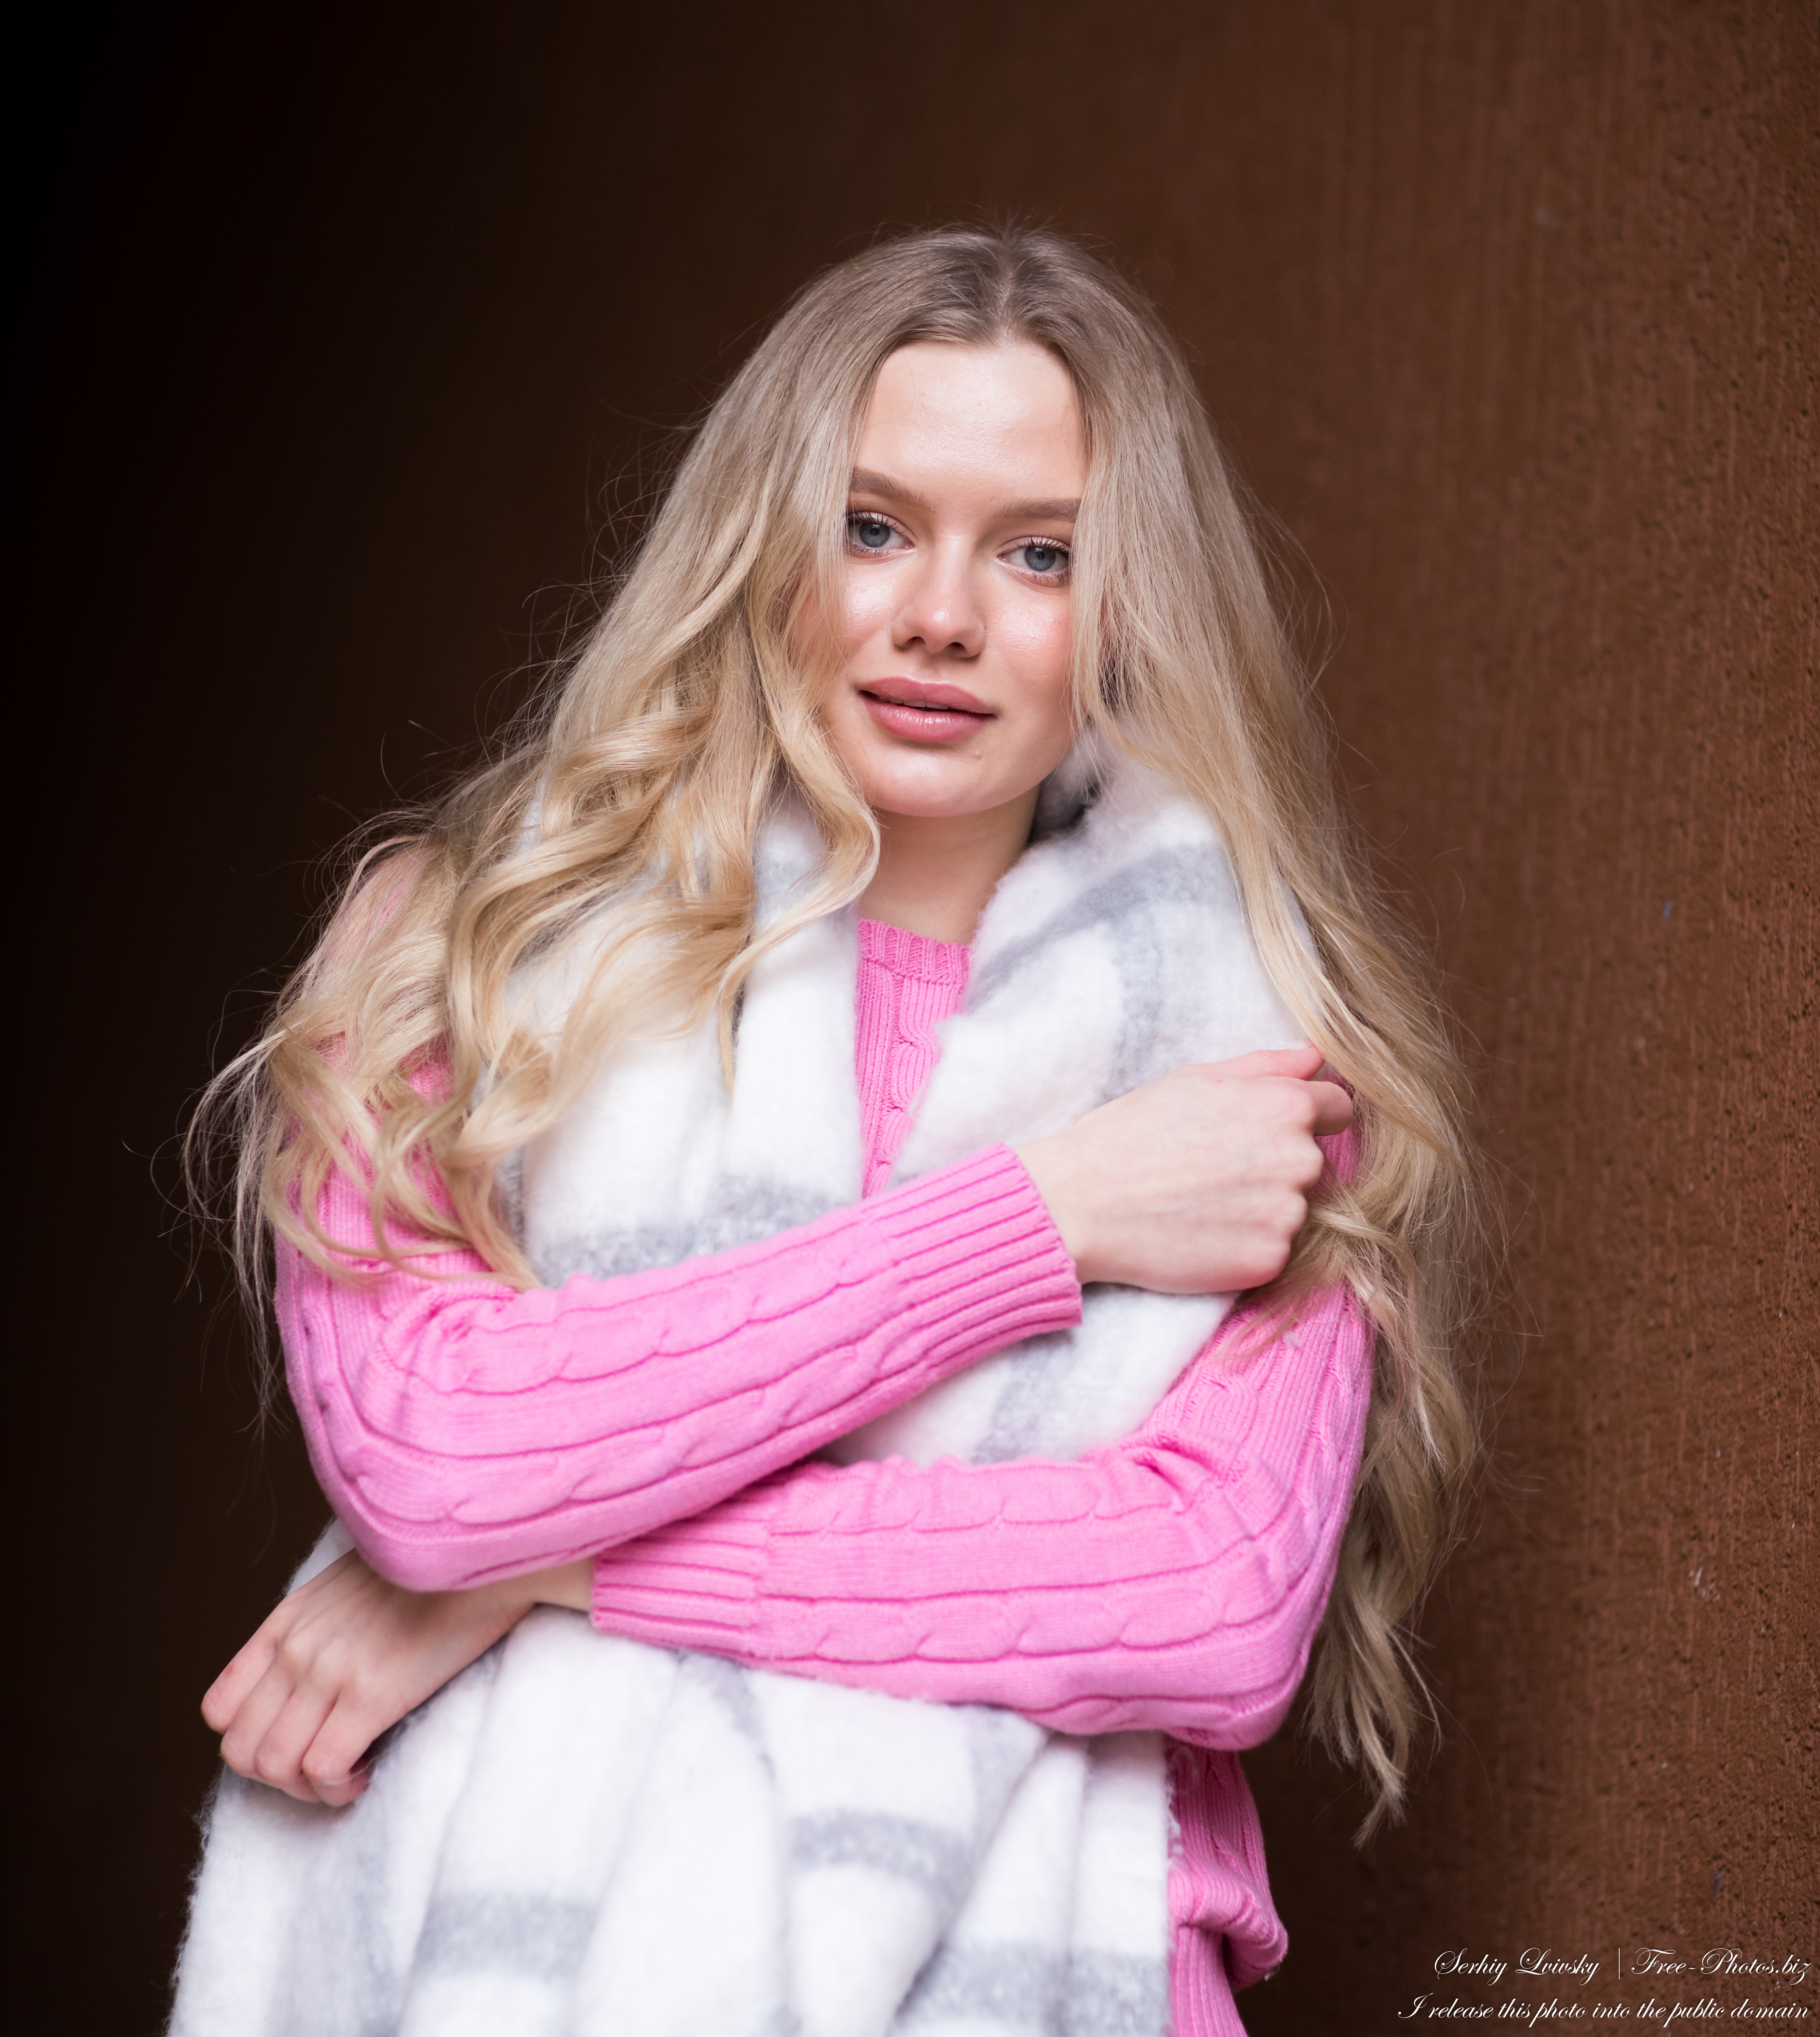 Oksana - a 19-year-old natural blonde girl photographed by Serhiy Lvivsky in March 2021, picture 20